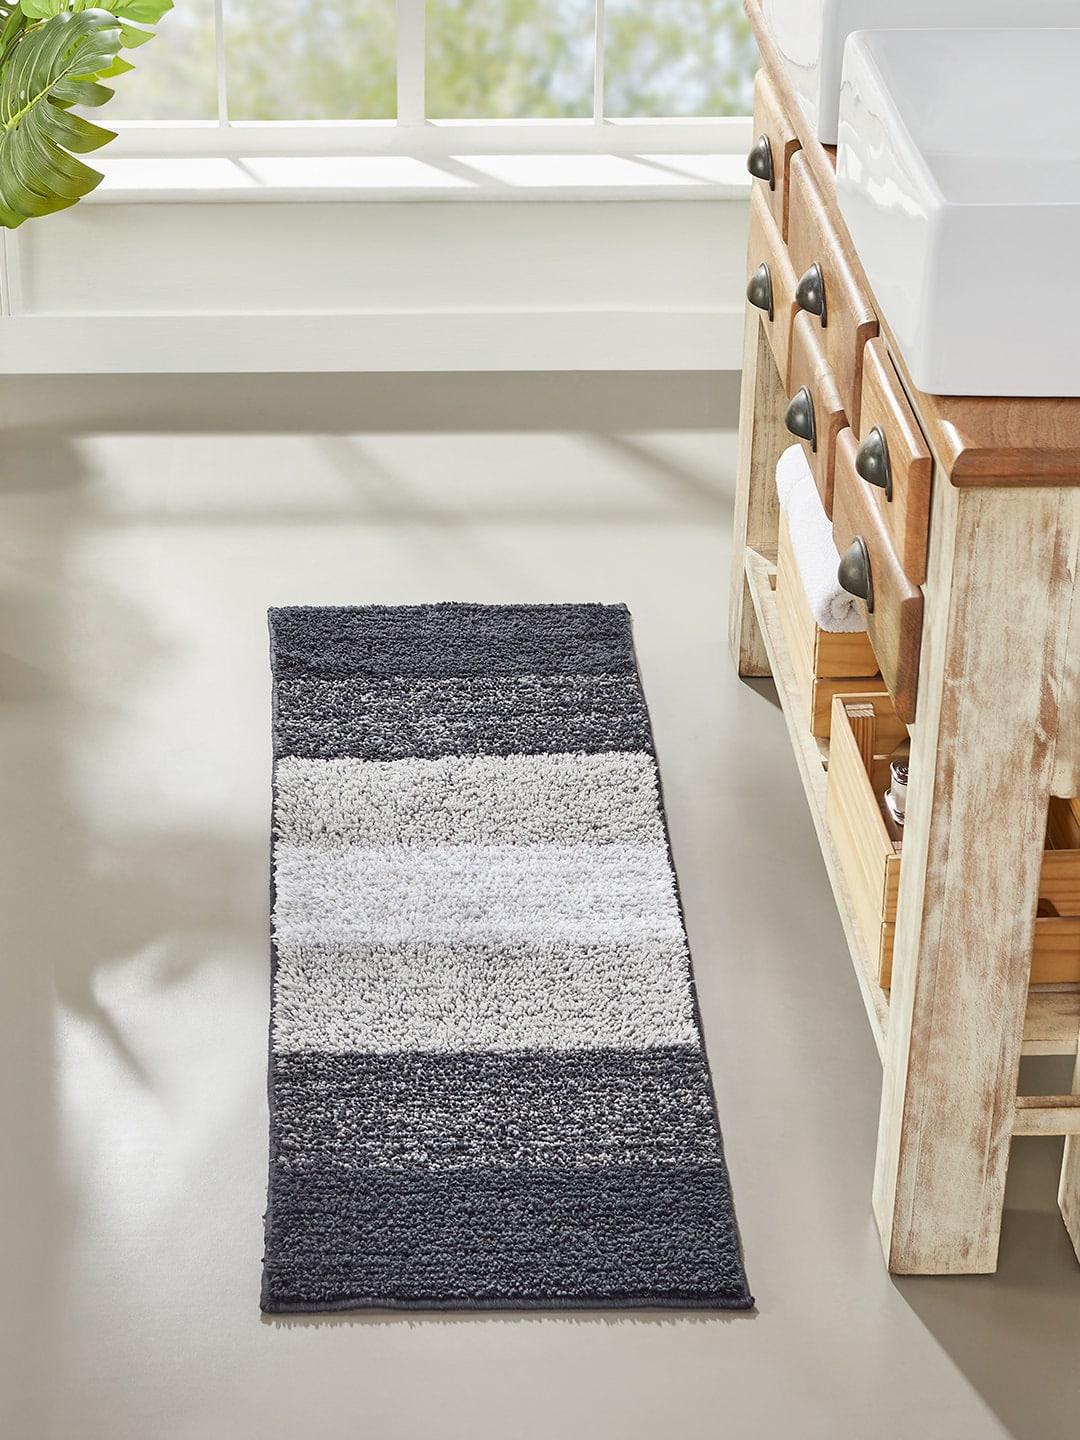 Pano Grey & White Srtriped 1634GSM Bathmats Price in India